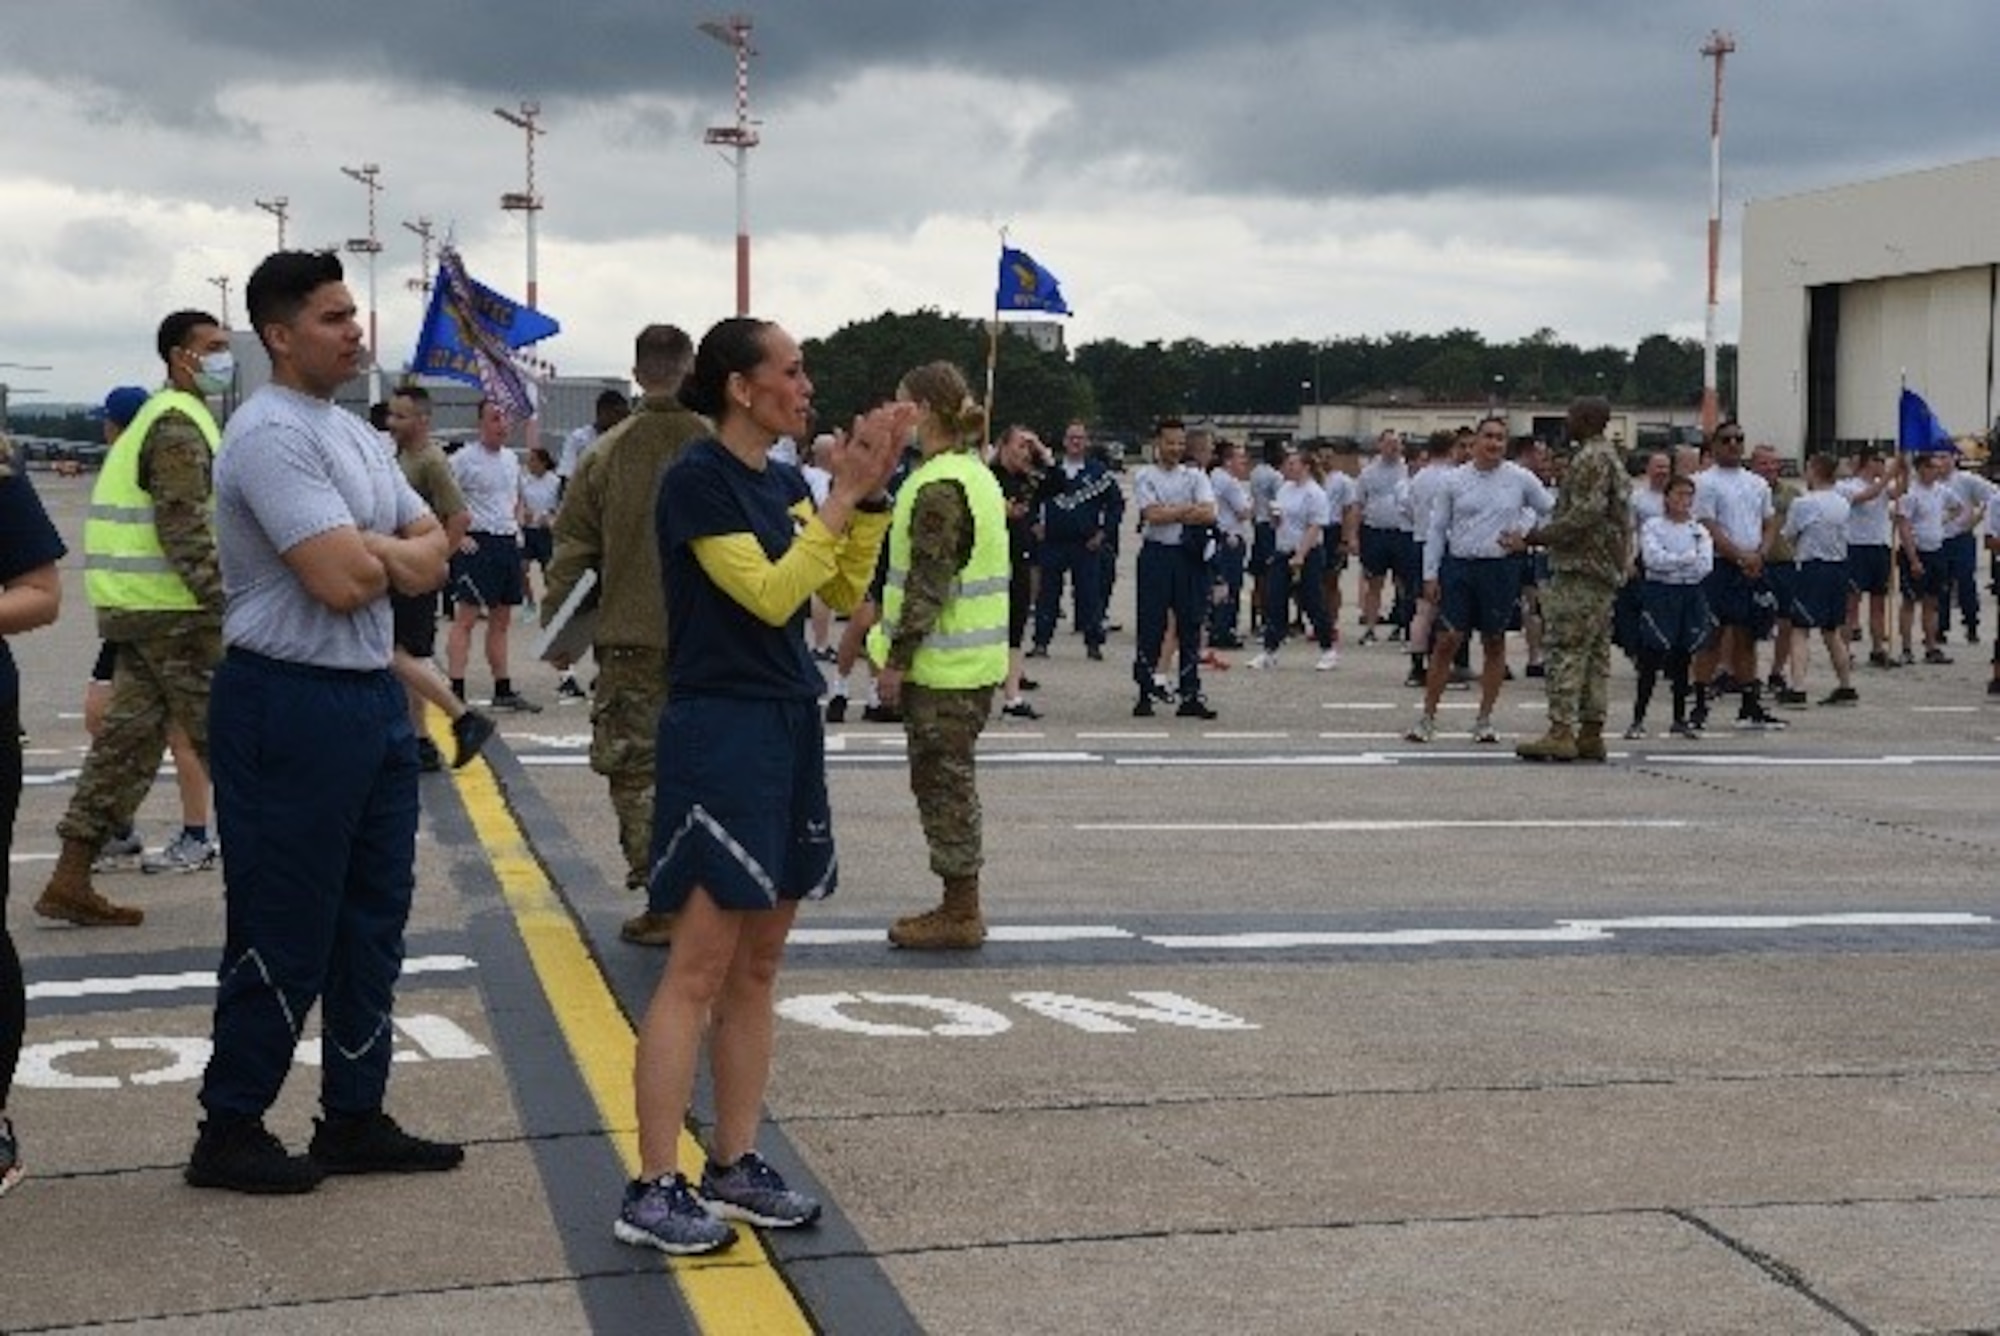 U.S. Air Force 86th Airlift Wing Command Chief Master Sgt. Hope Skibitsky cheers on runners on the flightline at Ramstein Air Base, Germany, July 1, 2021. Skibitsky and others participated in the 5K run to increase morale and physical fitness as fitness assessments kick off. (U.S. Air Force photo by Jocelyn Ford)